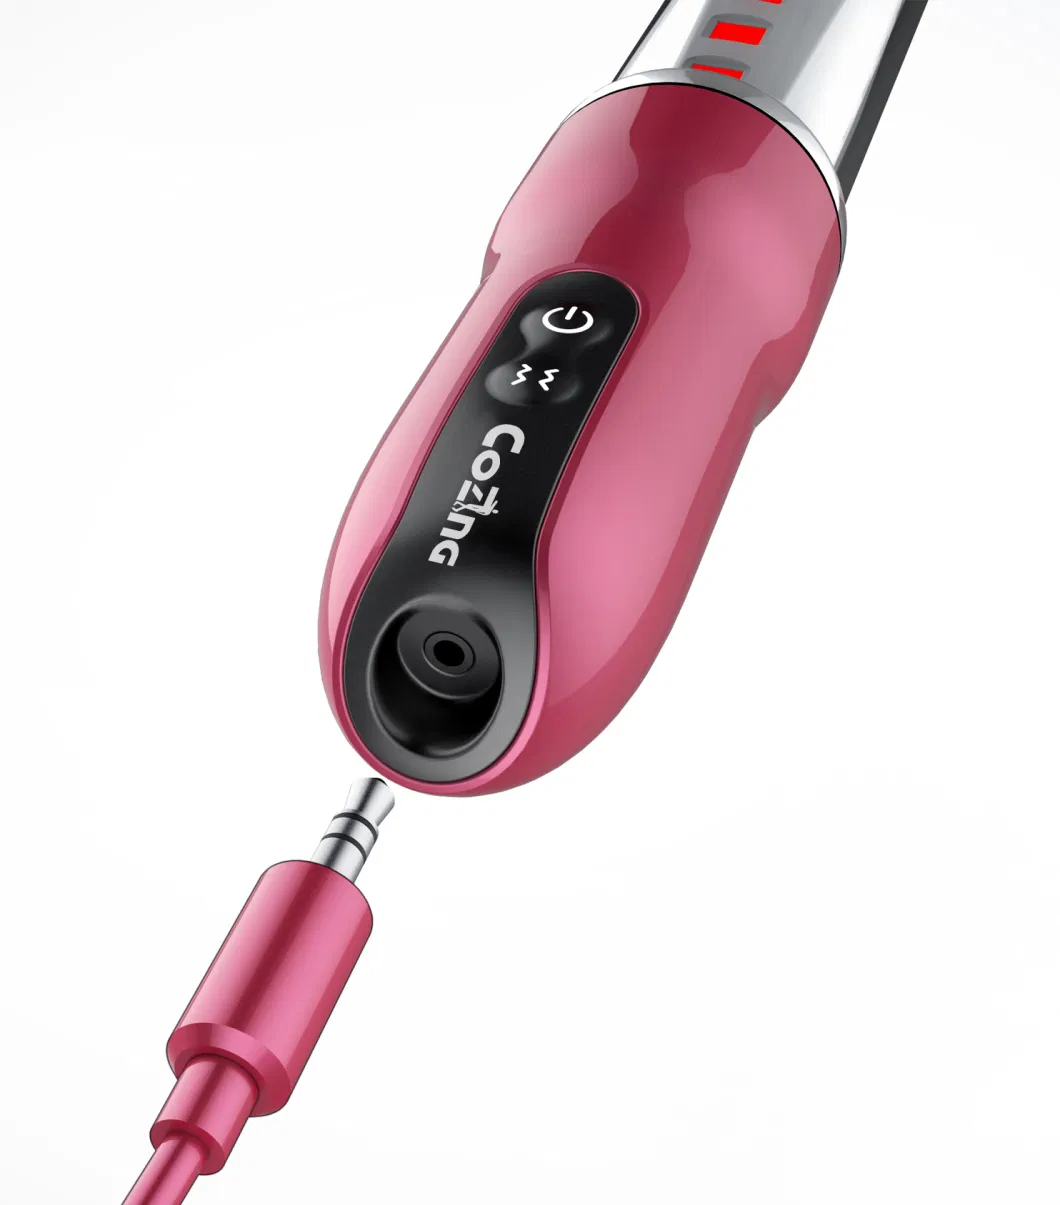 Infrared Light Vagina Therapy Vibrator Massager Gynecology Laser Equipment for Women